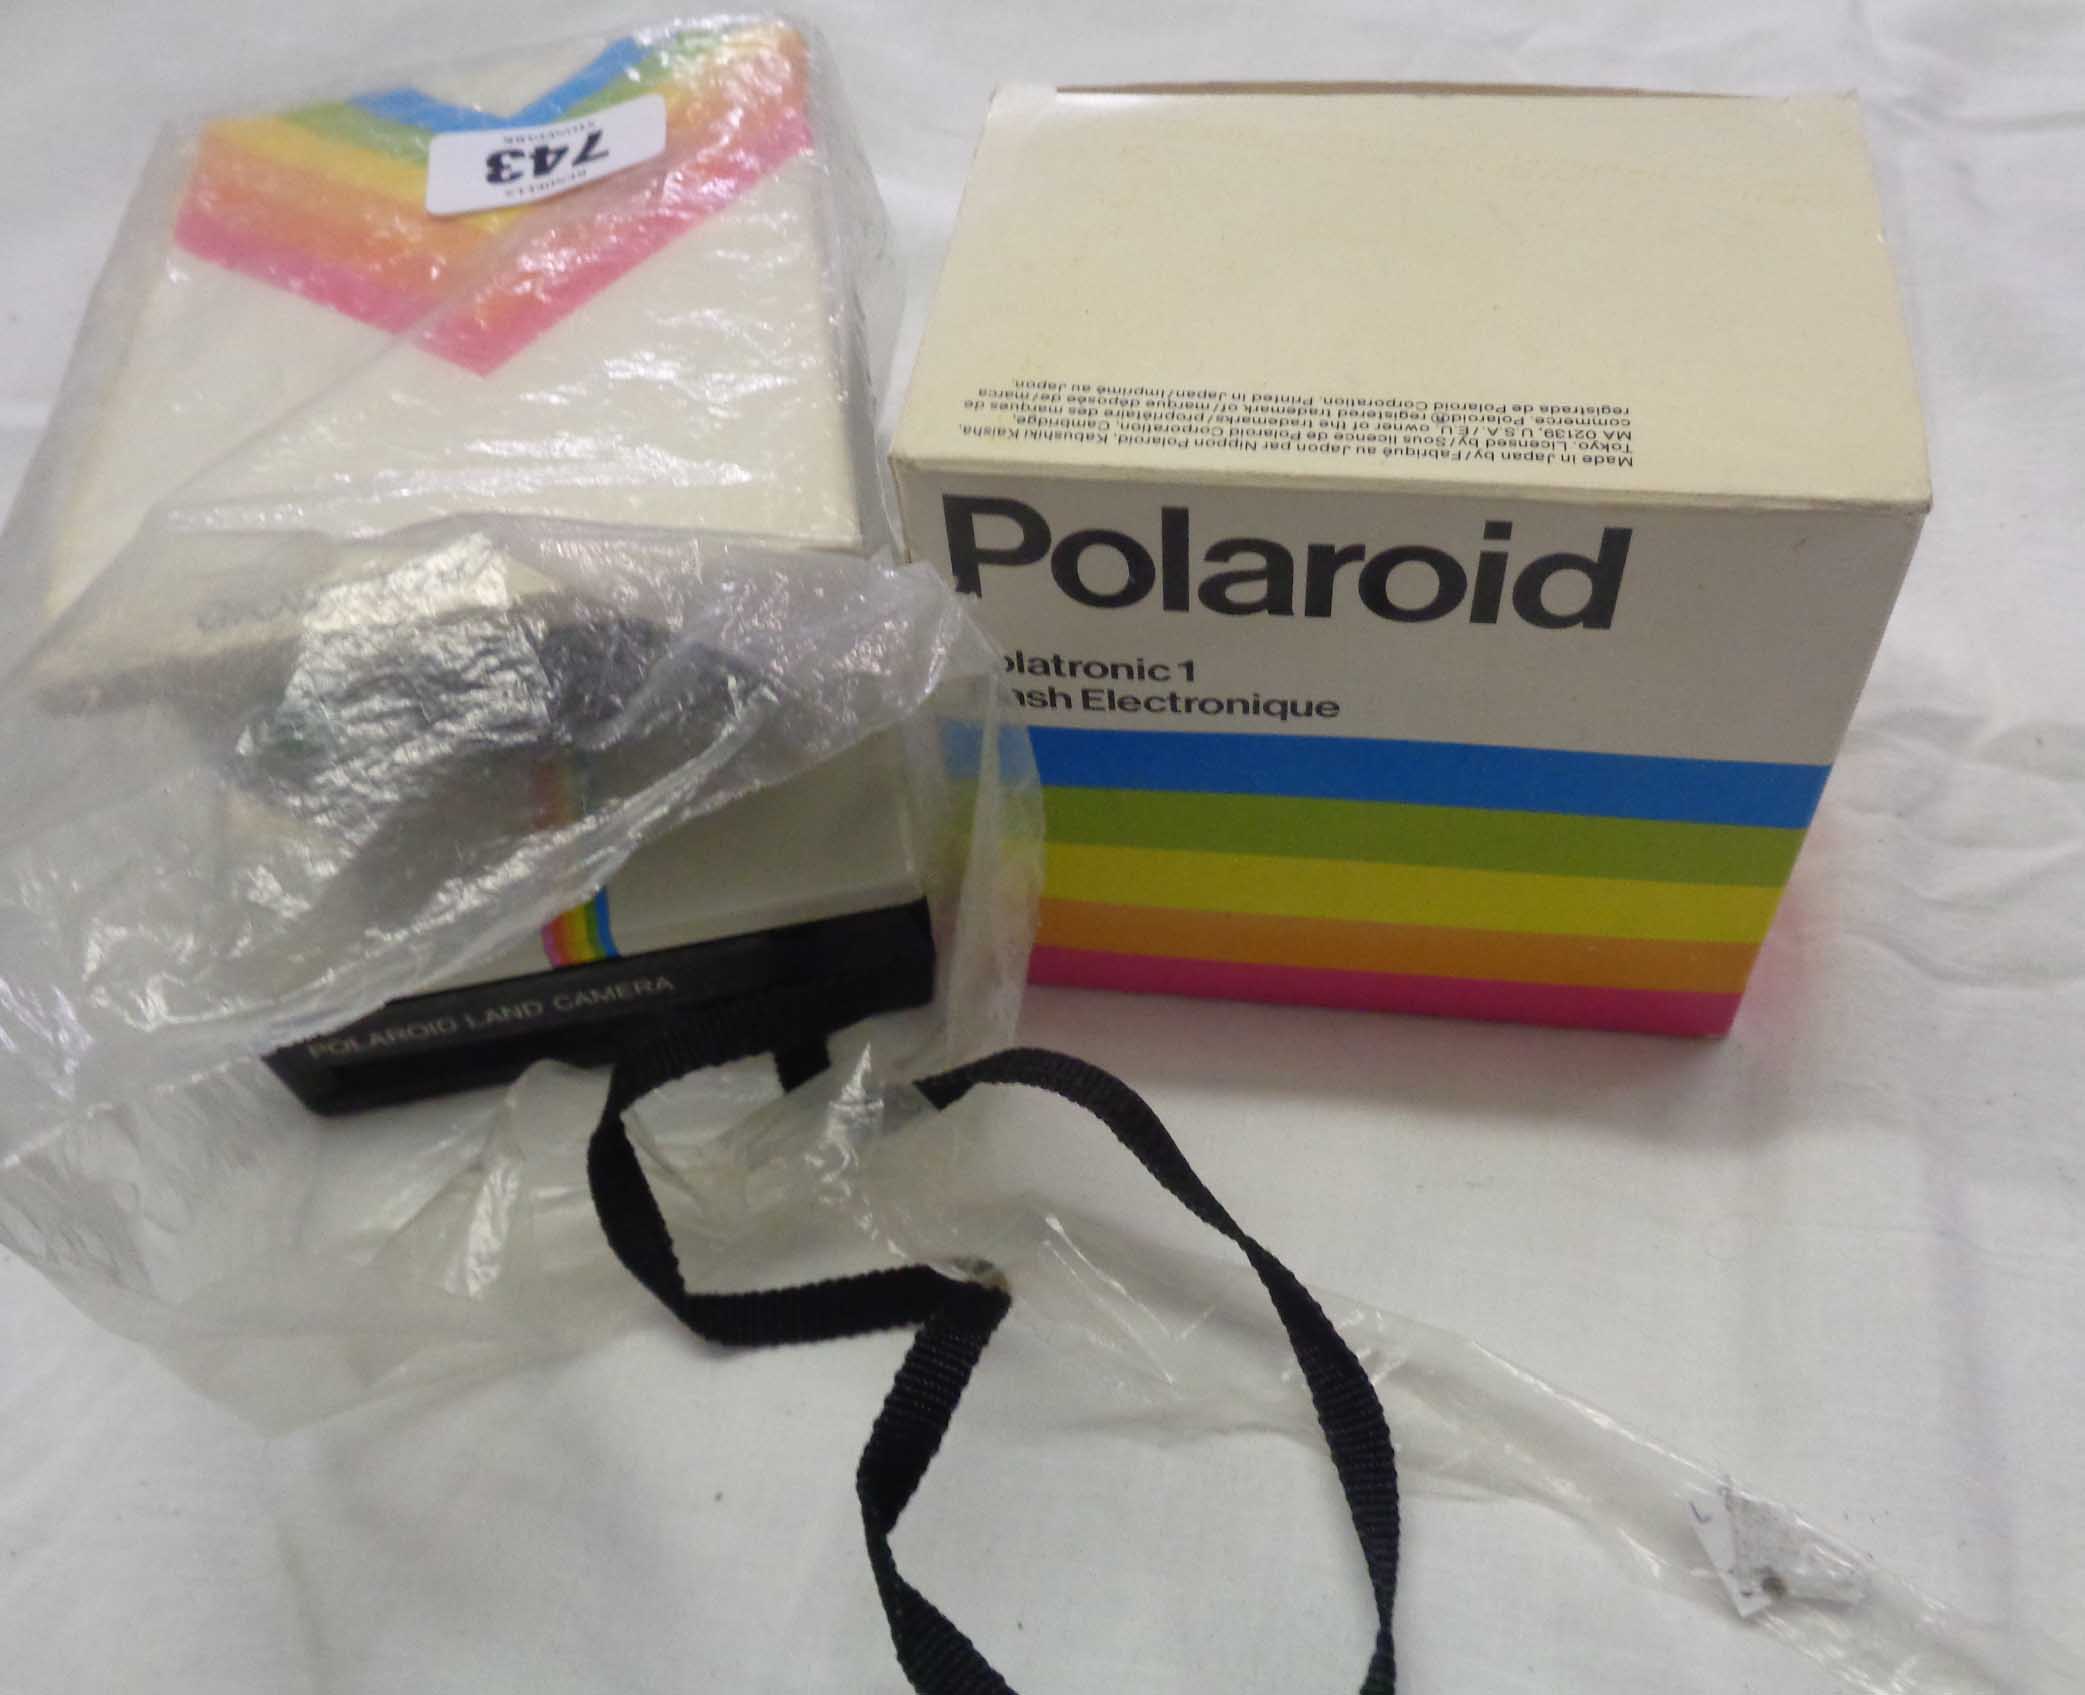 A Polaroid 1000 land camera with instructions and boxed Polartronic flash